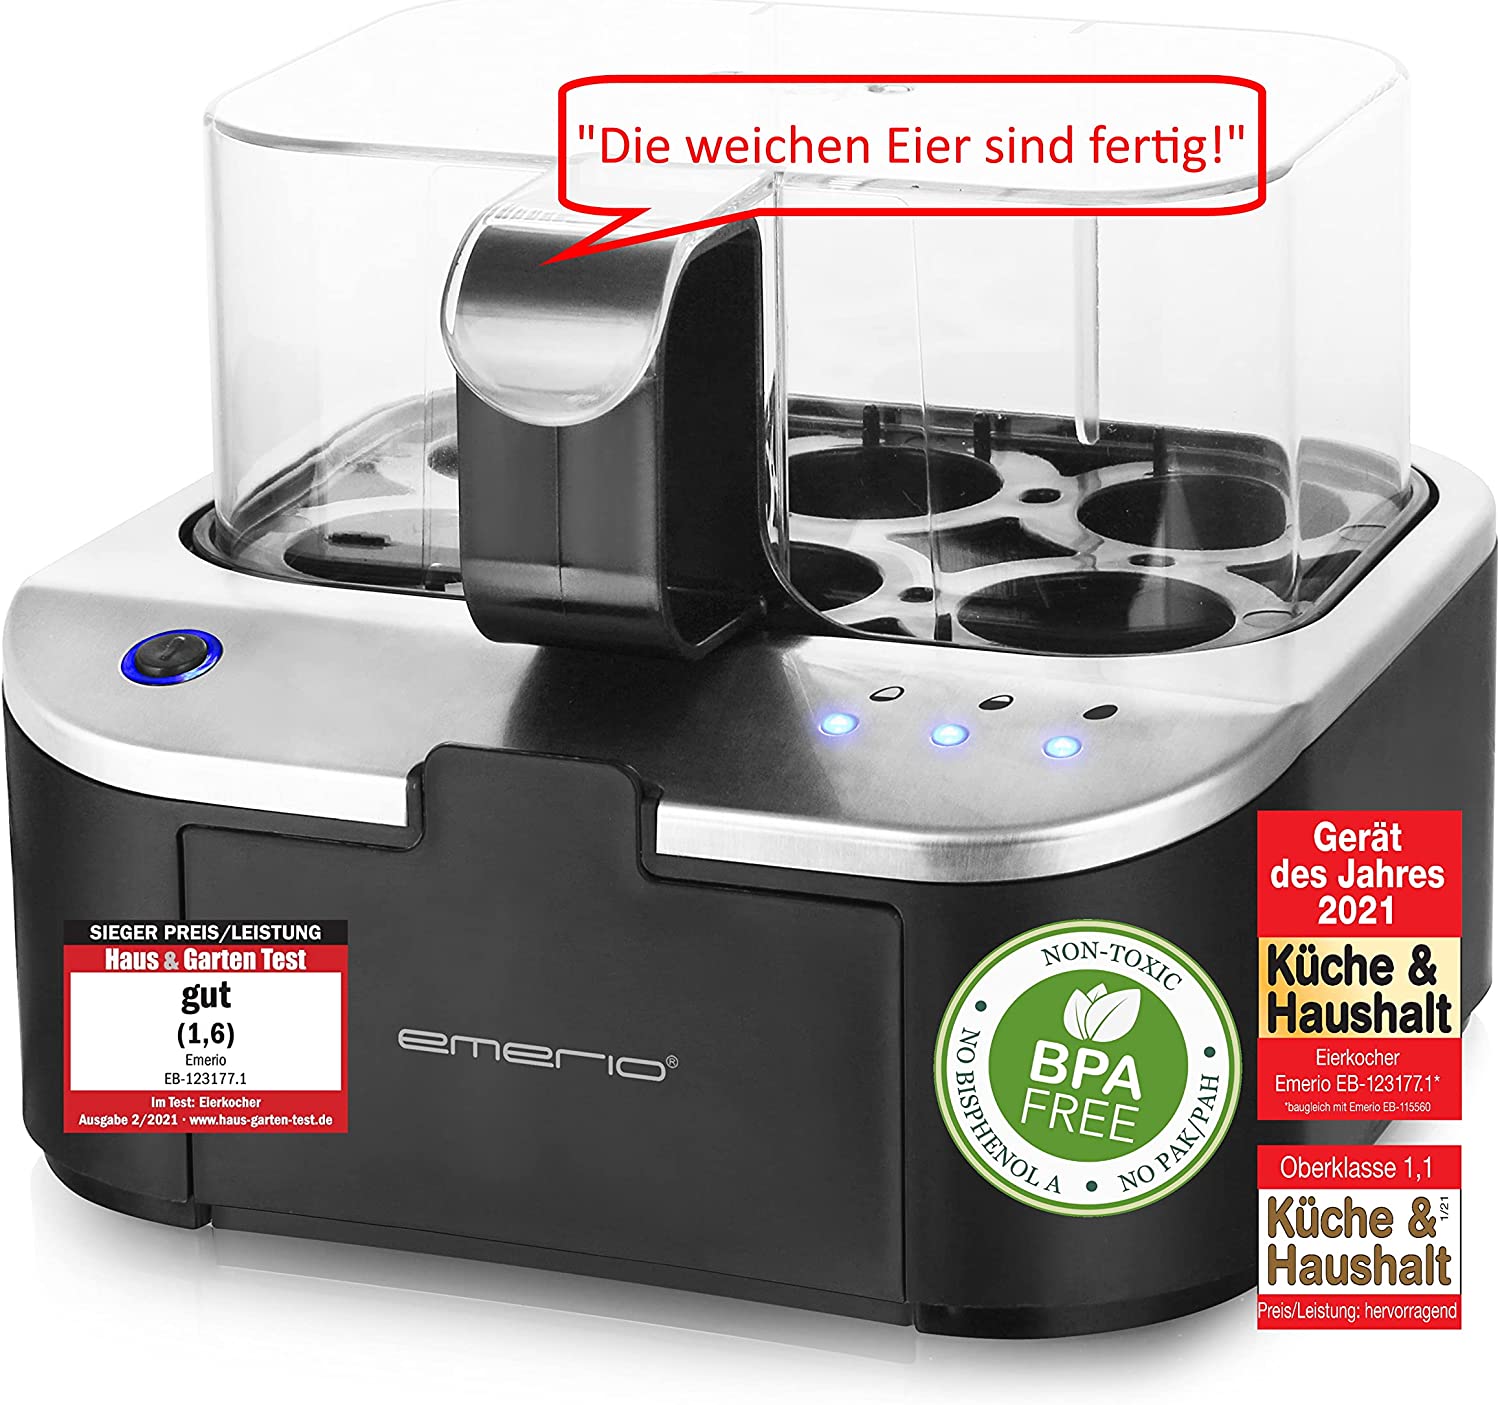 Emerio EB-115560.2, cooks all three cooking levels [soft / medium / hard] in just one cooking process with perfect results technology and design